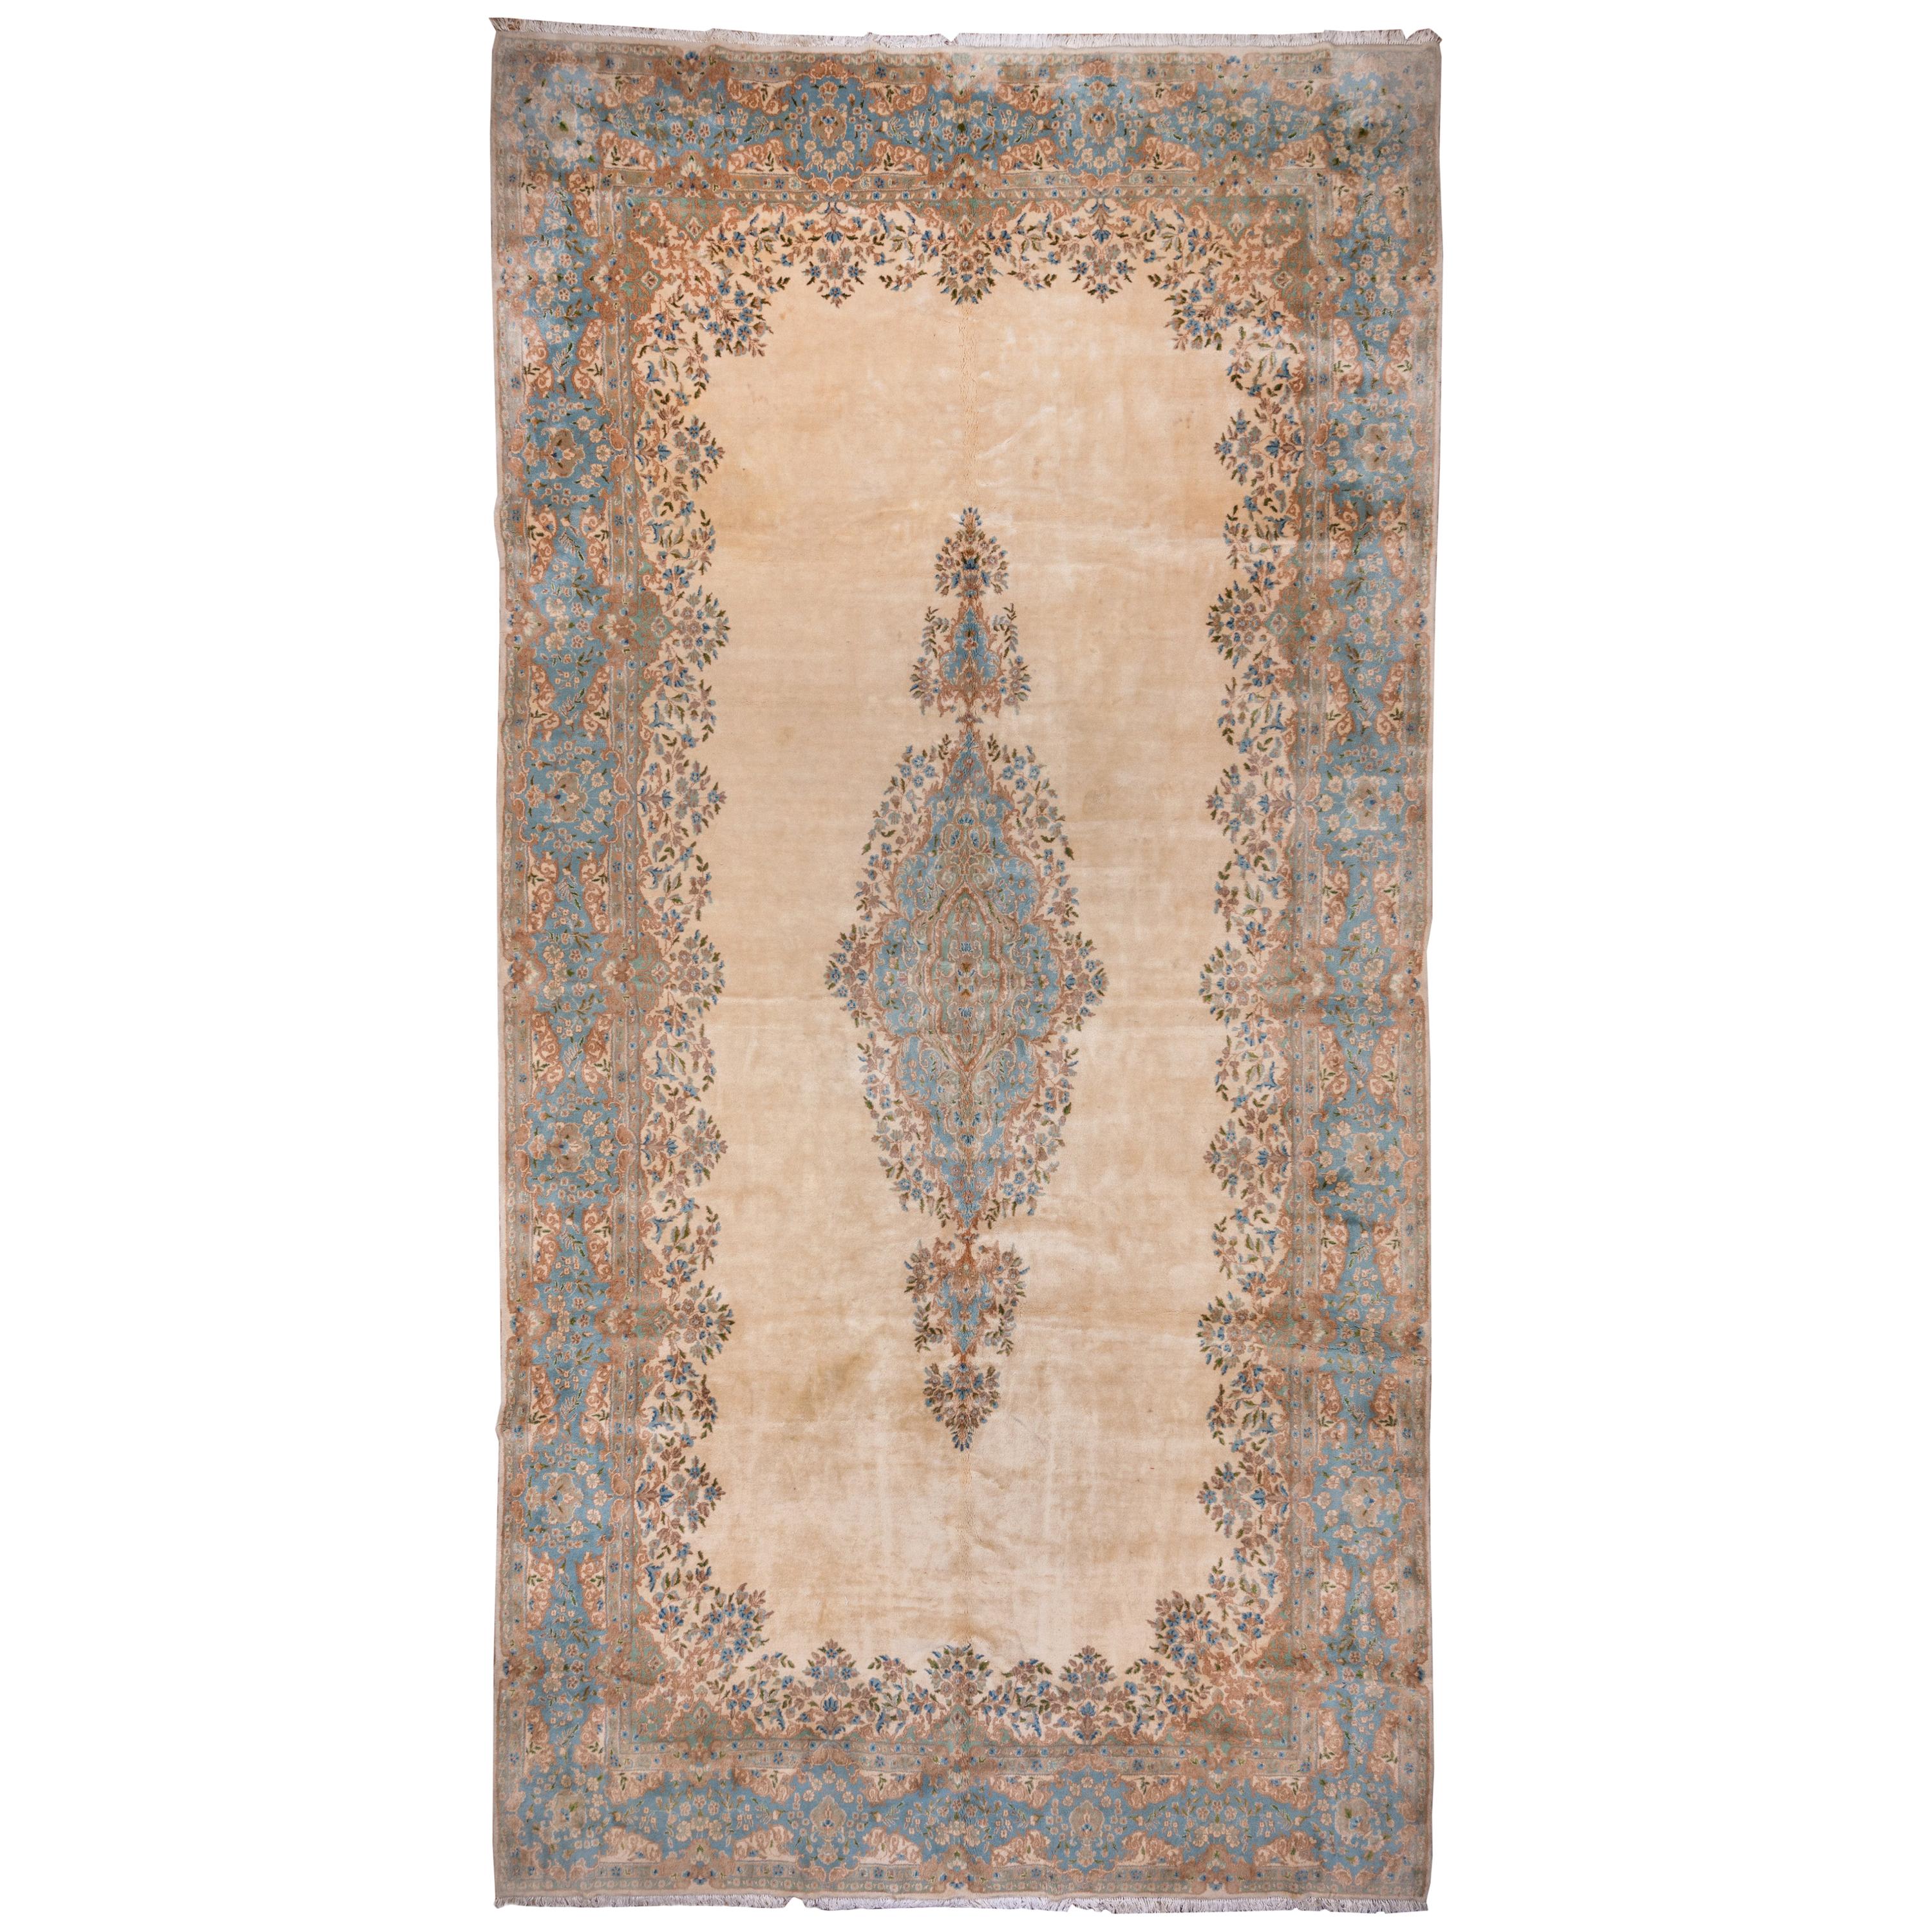 Wide Antique Persian Kerman Gallery Carpet, Ivory Field, Light Blue Accents For Sale